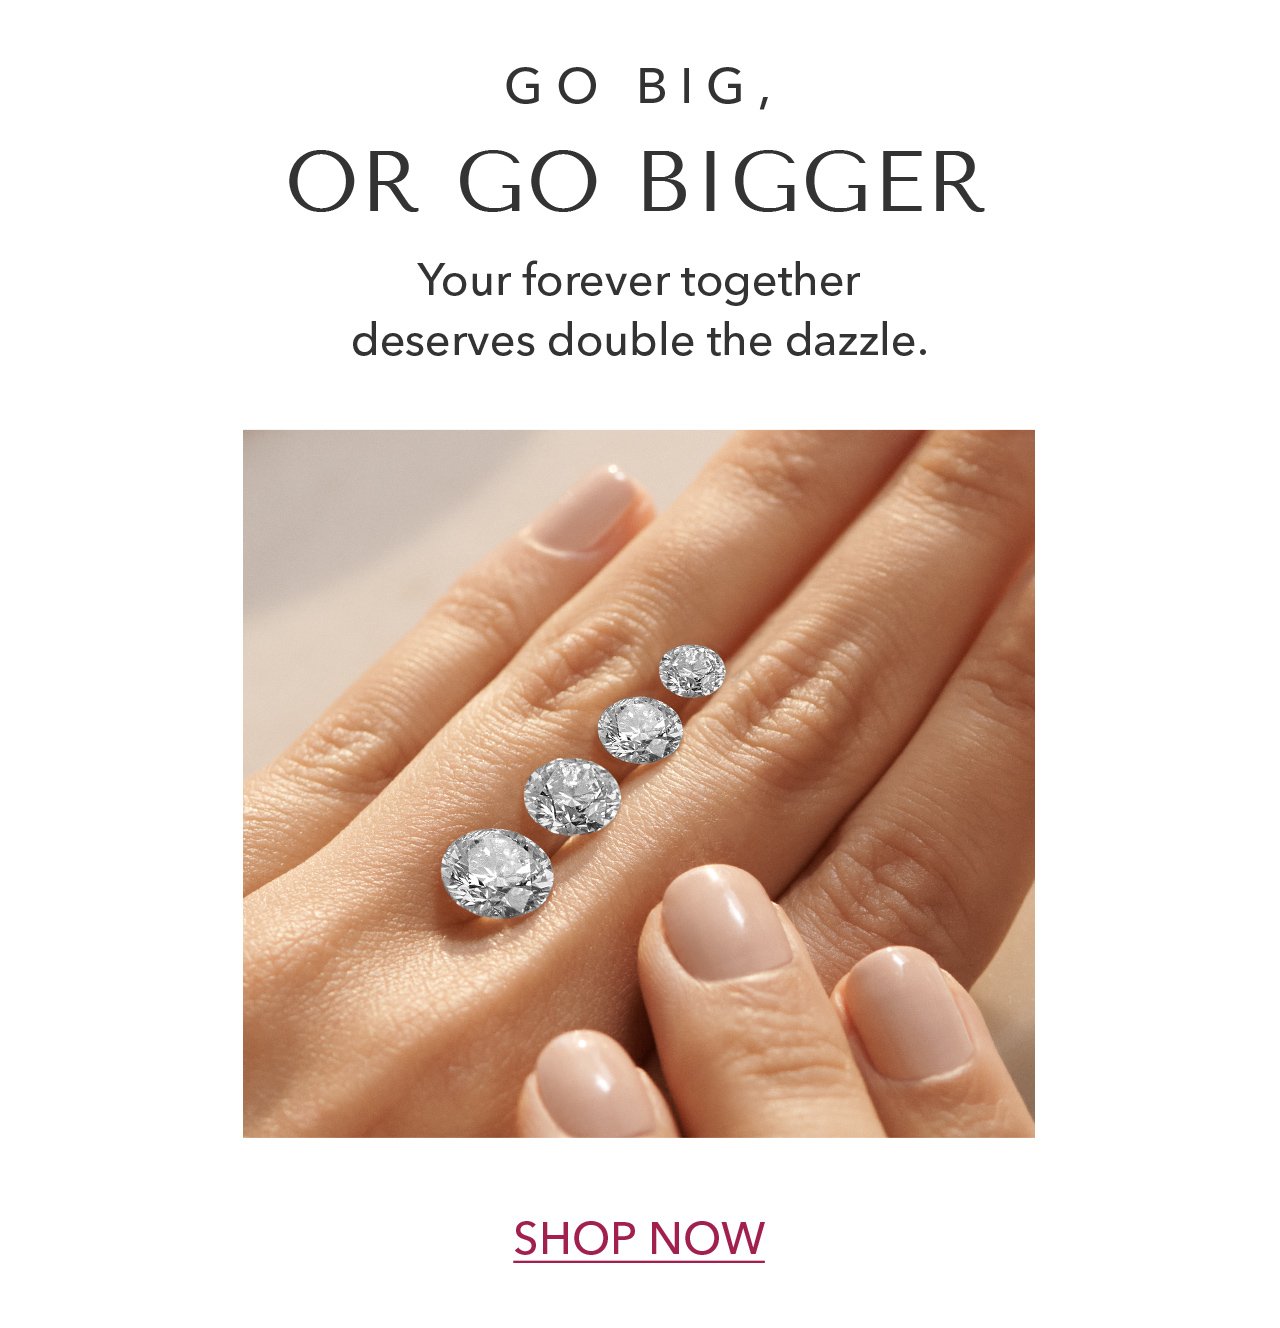 GO BIG, OR GO BIGGER | Your forever together deserves double the dazzle. SHOP NOW